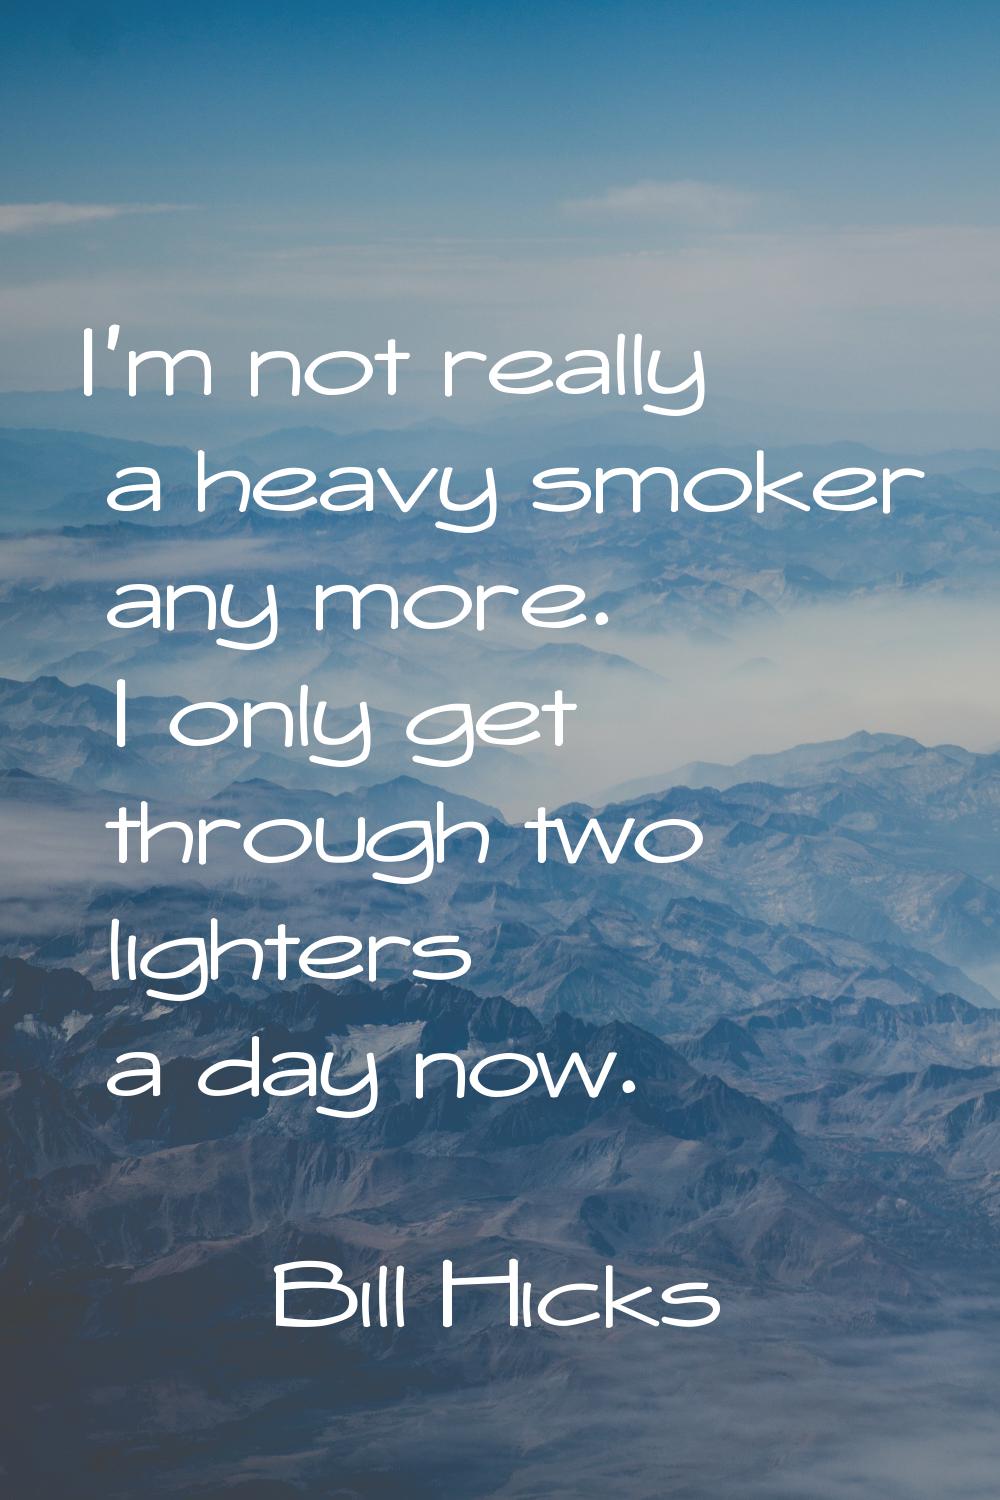 I'm not really a heavy smoker any more. I only get through two lighters a day now.